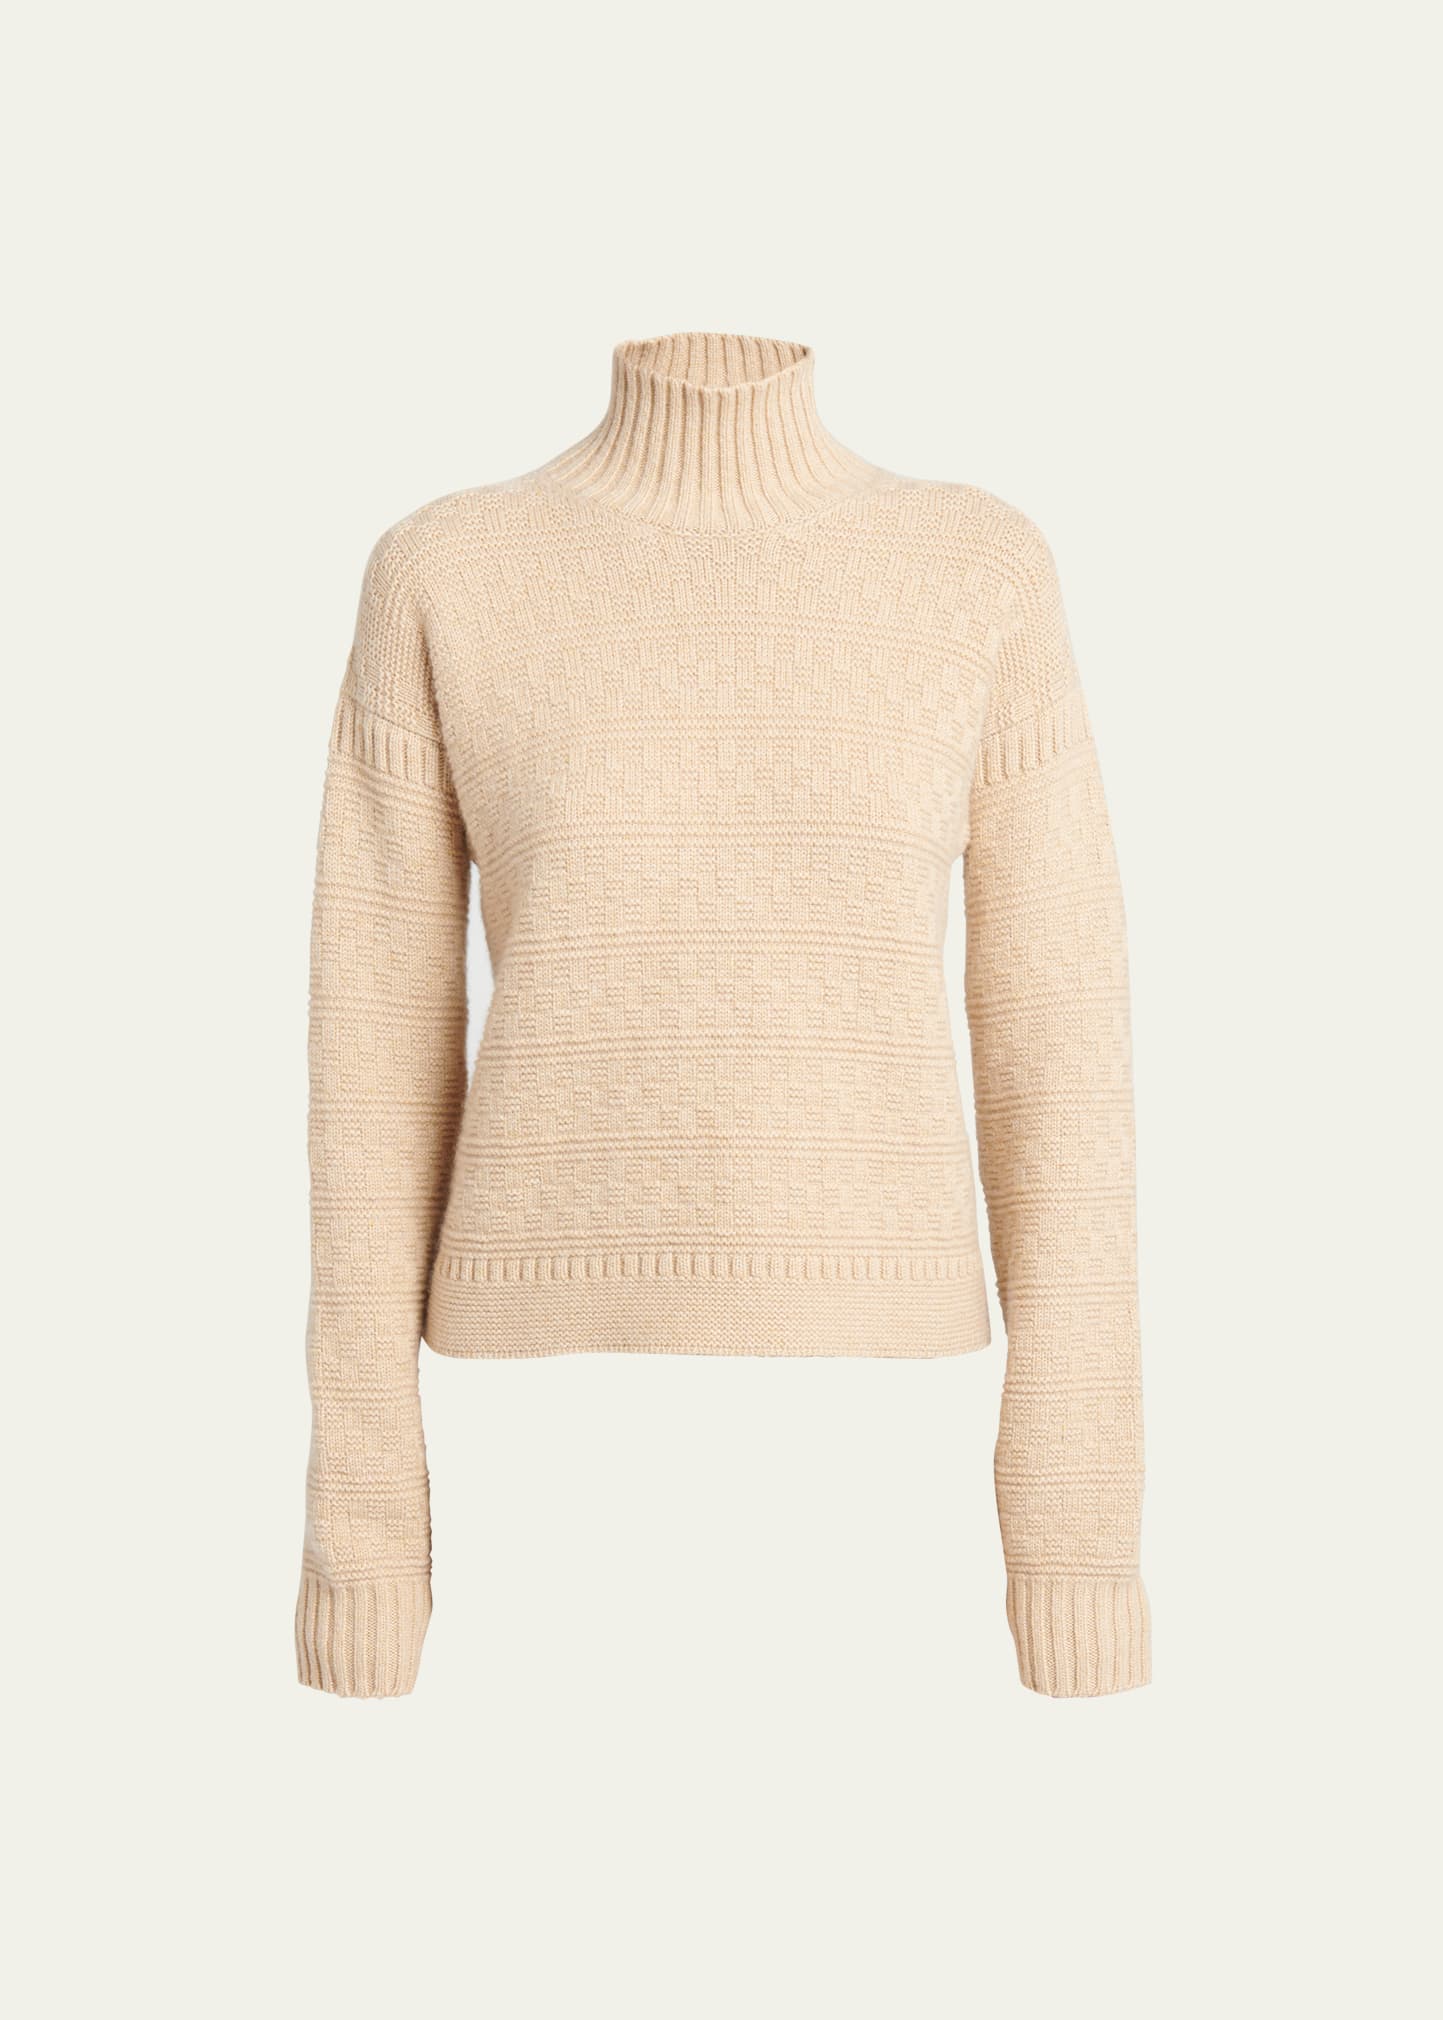 New Plymouth Cashmere High-Neck Sweater